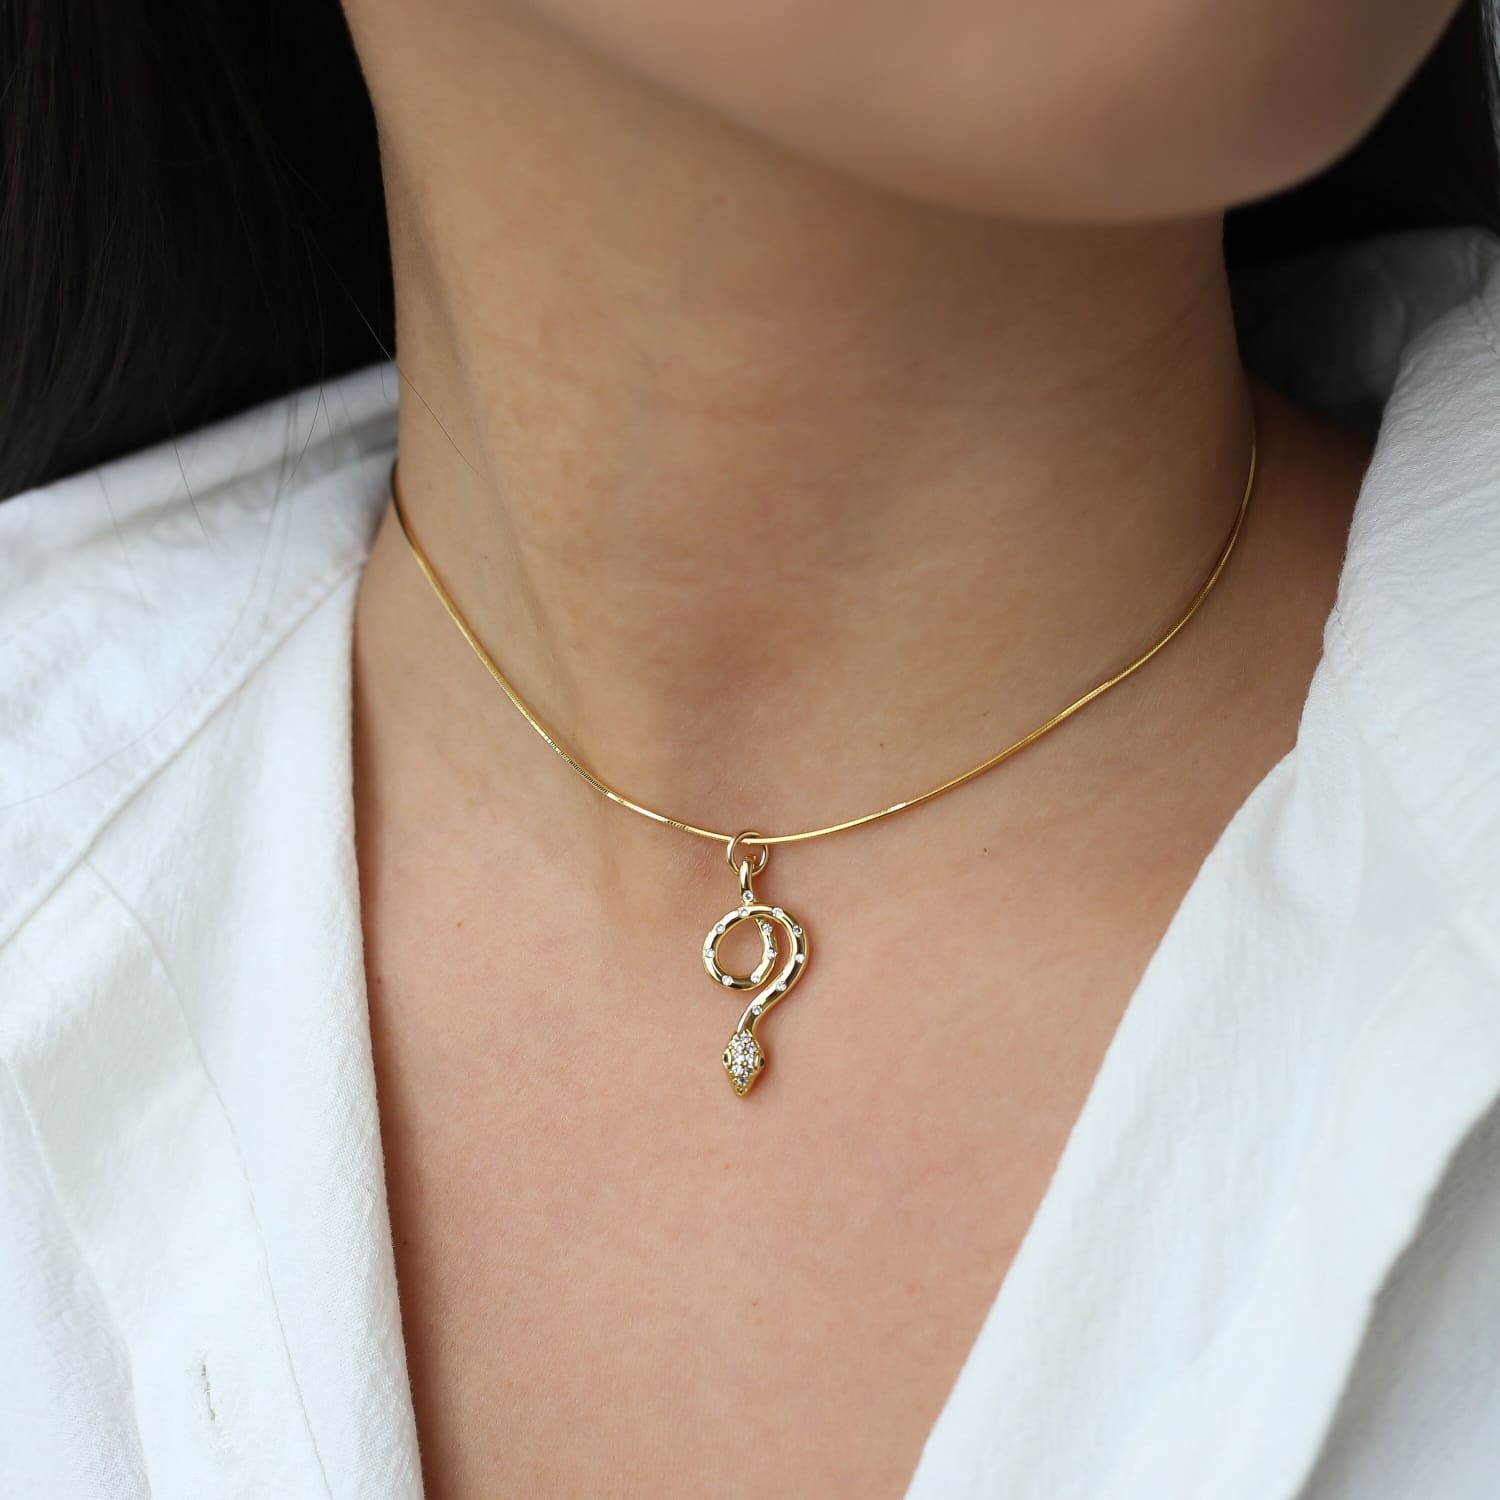 Bailey - necklace with gold-filled chain and pendant